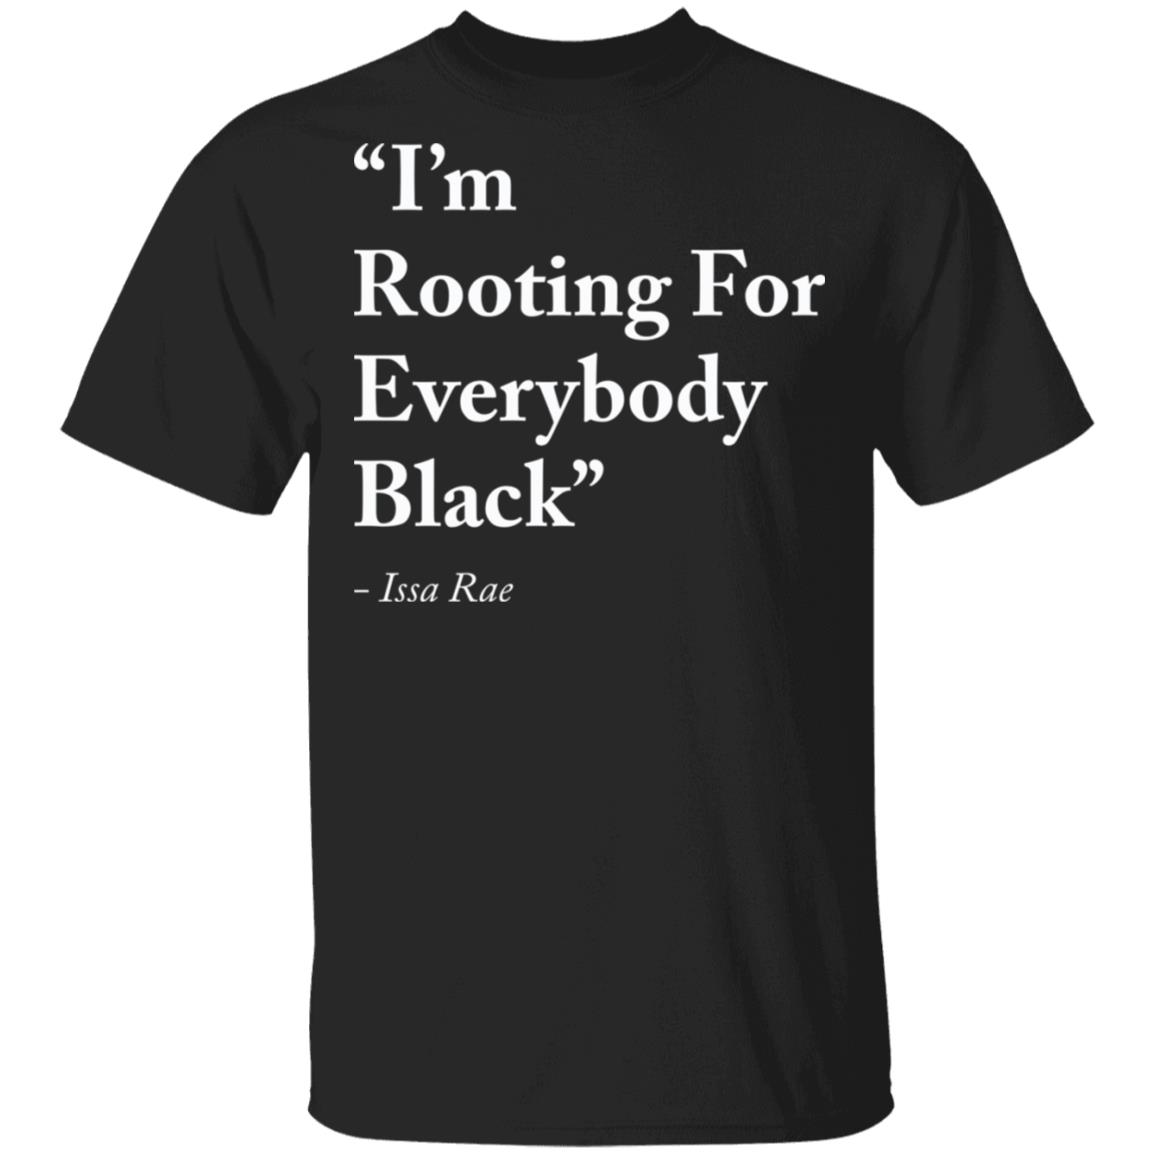 I’m rooting for everybody black shirt - Rockatee